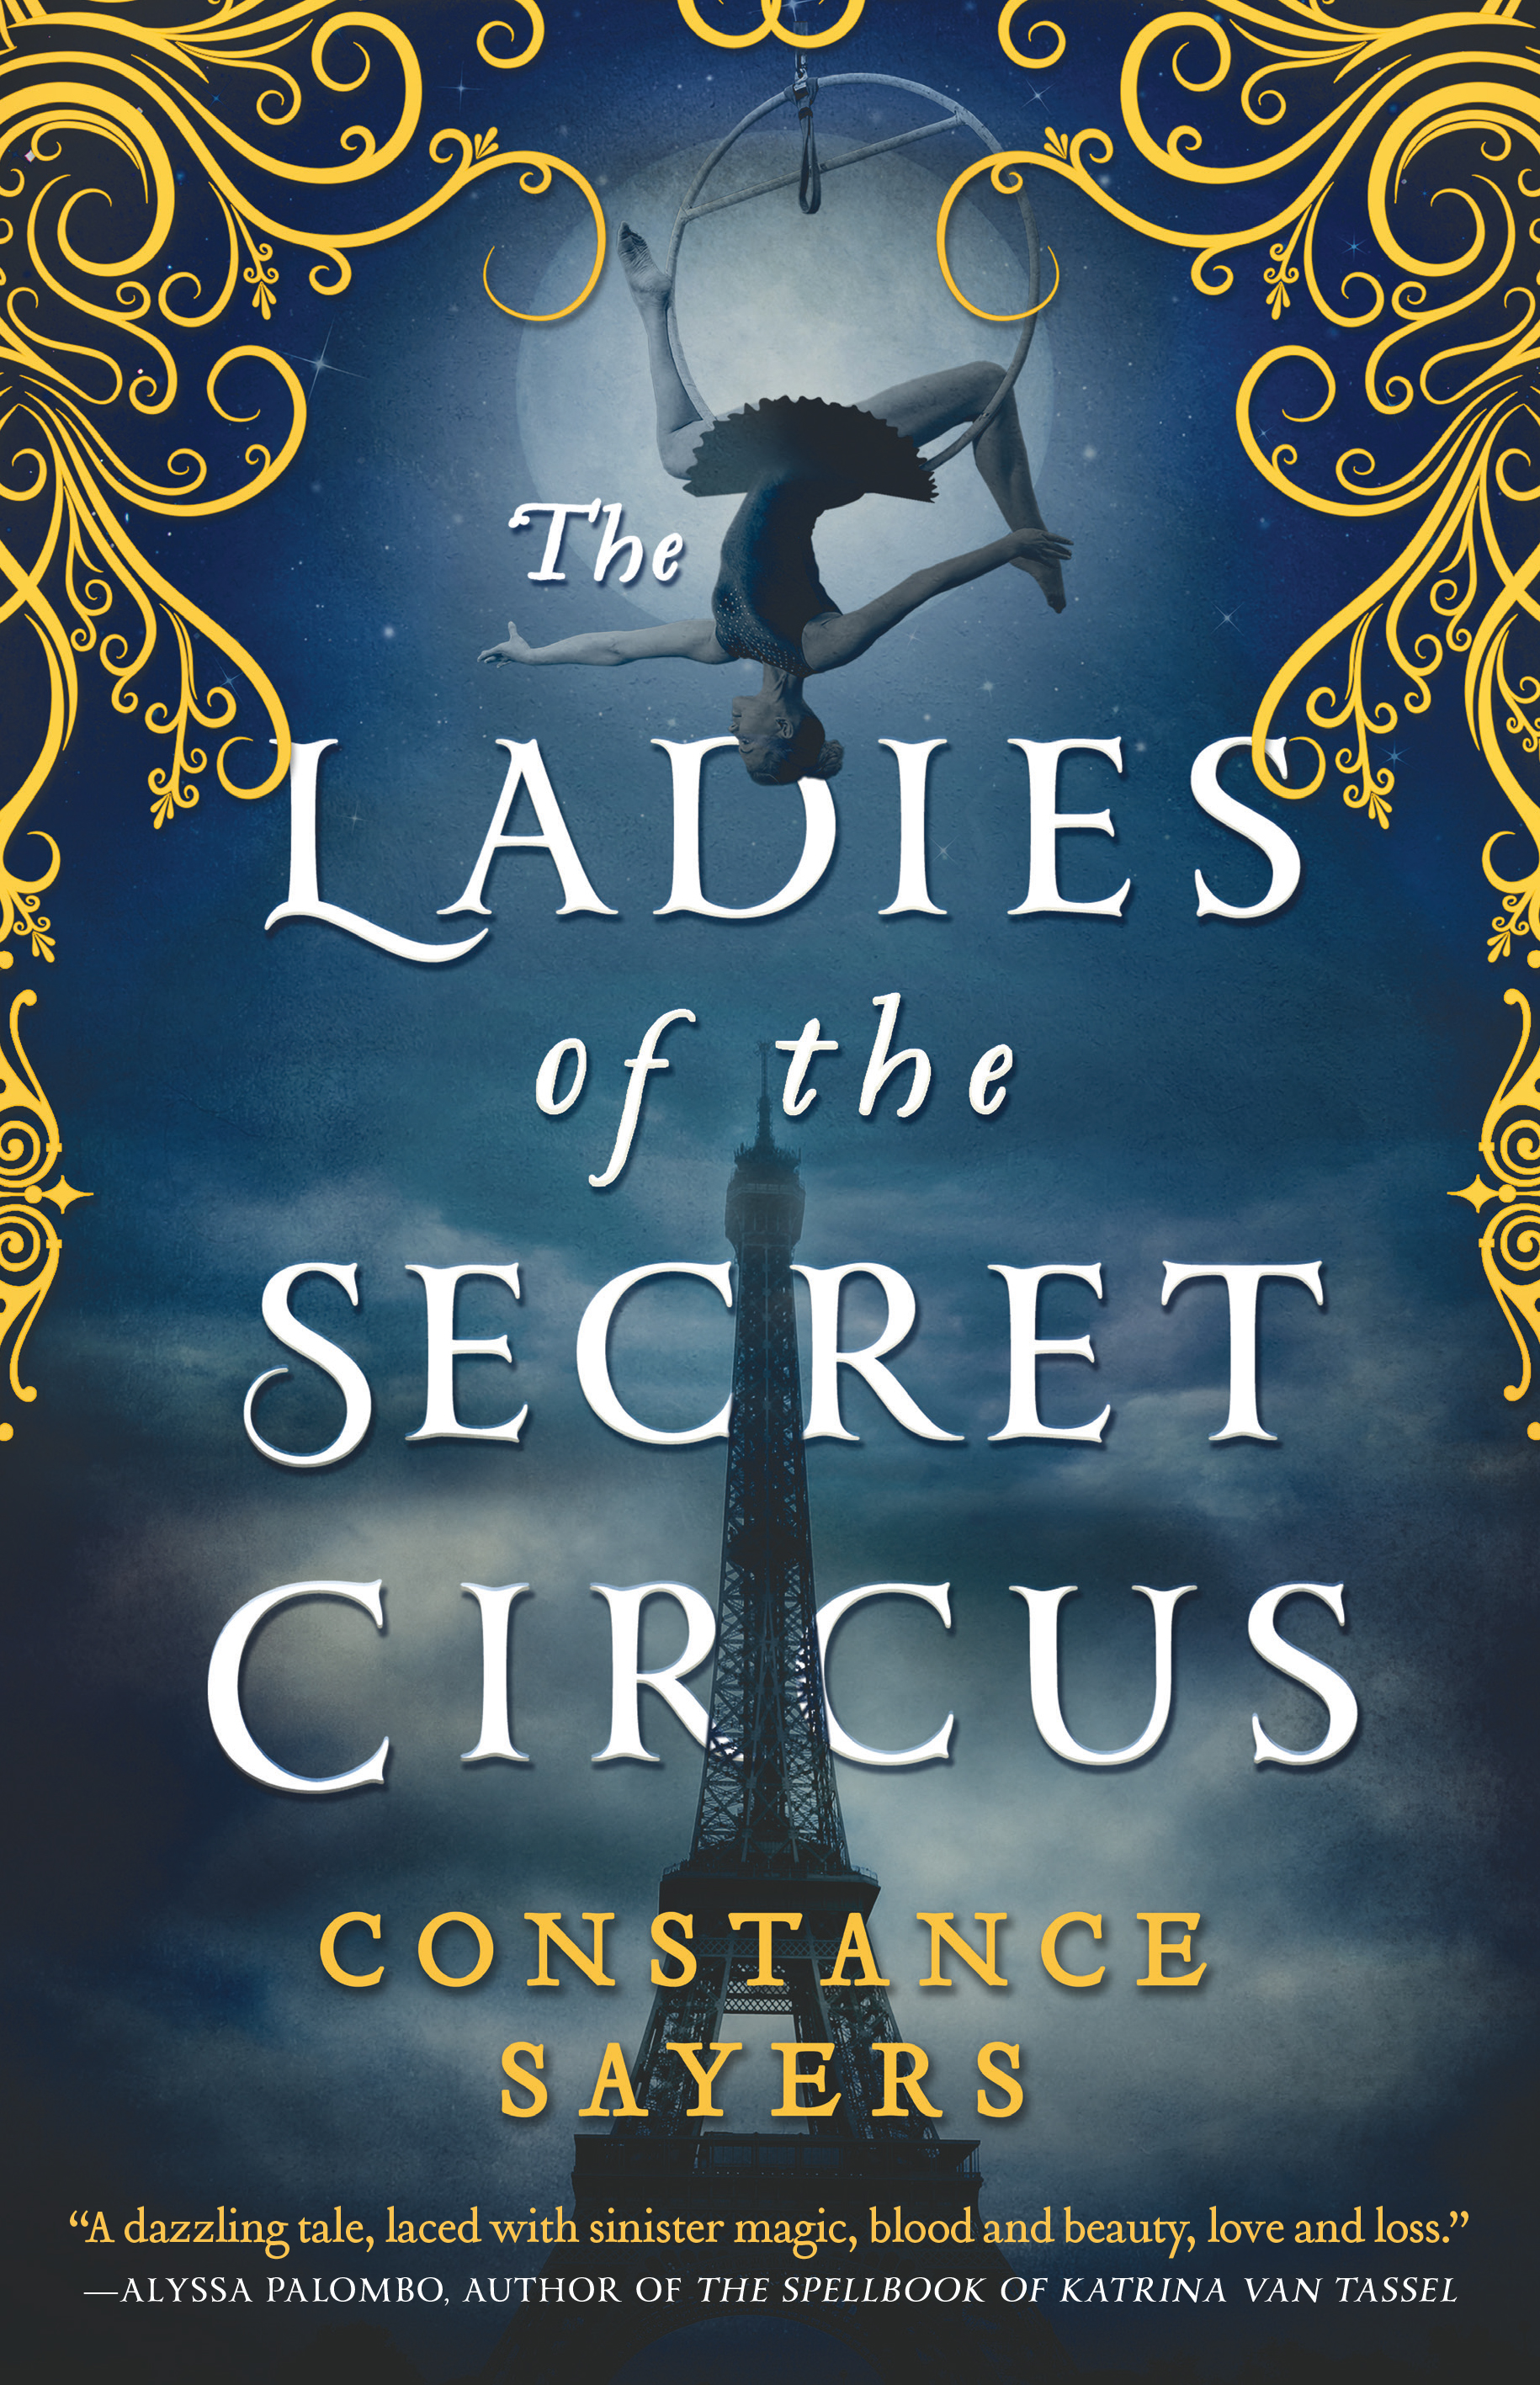 Virtual event with Constance Sayers/The Ladies of the Secret Circus